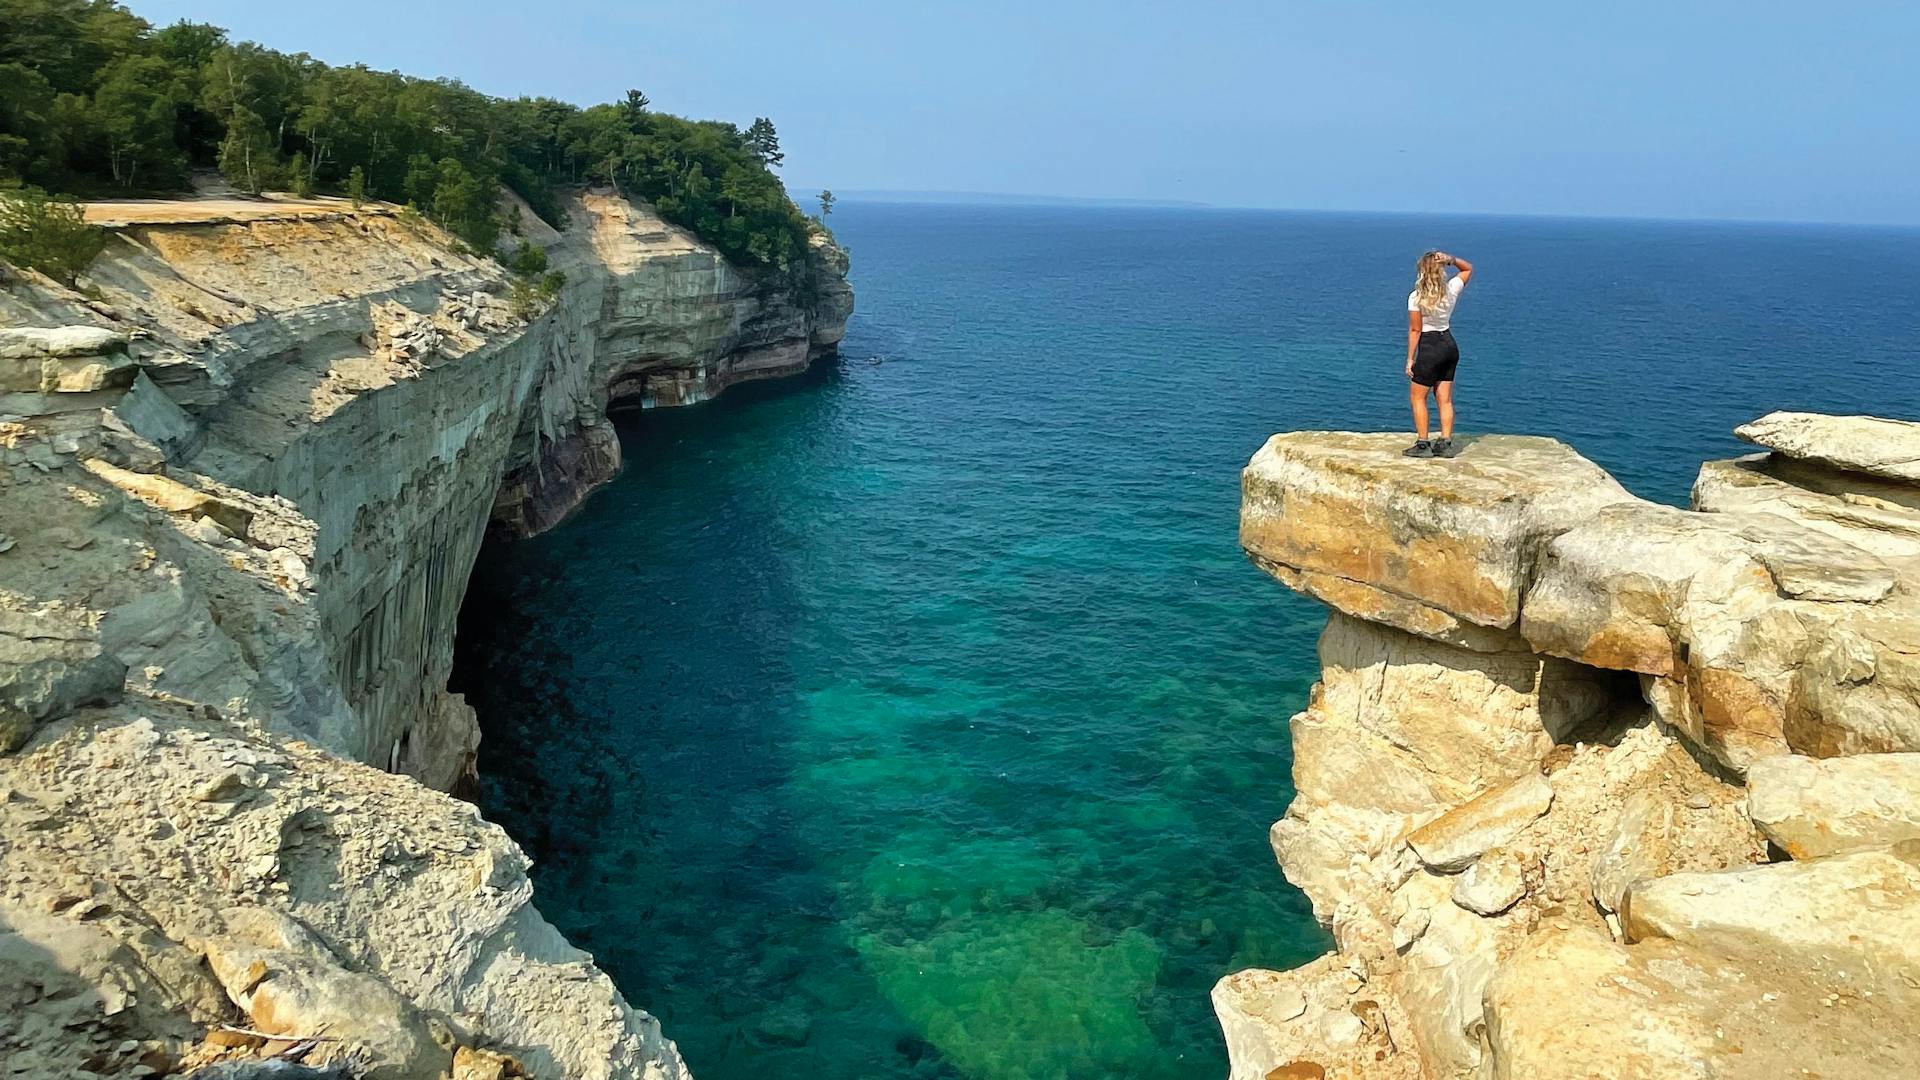 Pictured Rocks National Lakeshore in Munising, Michigan (photo by Kaitlyn O’Brien)